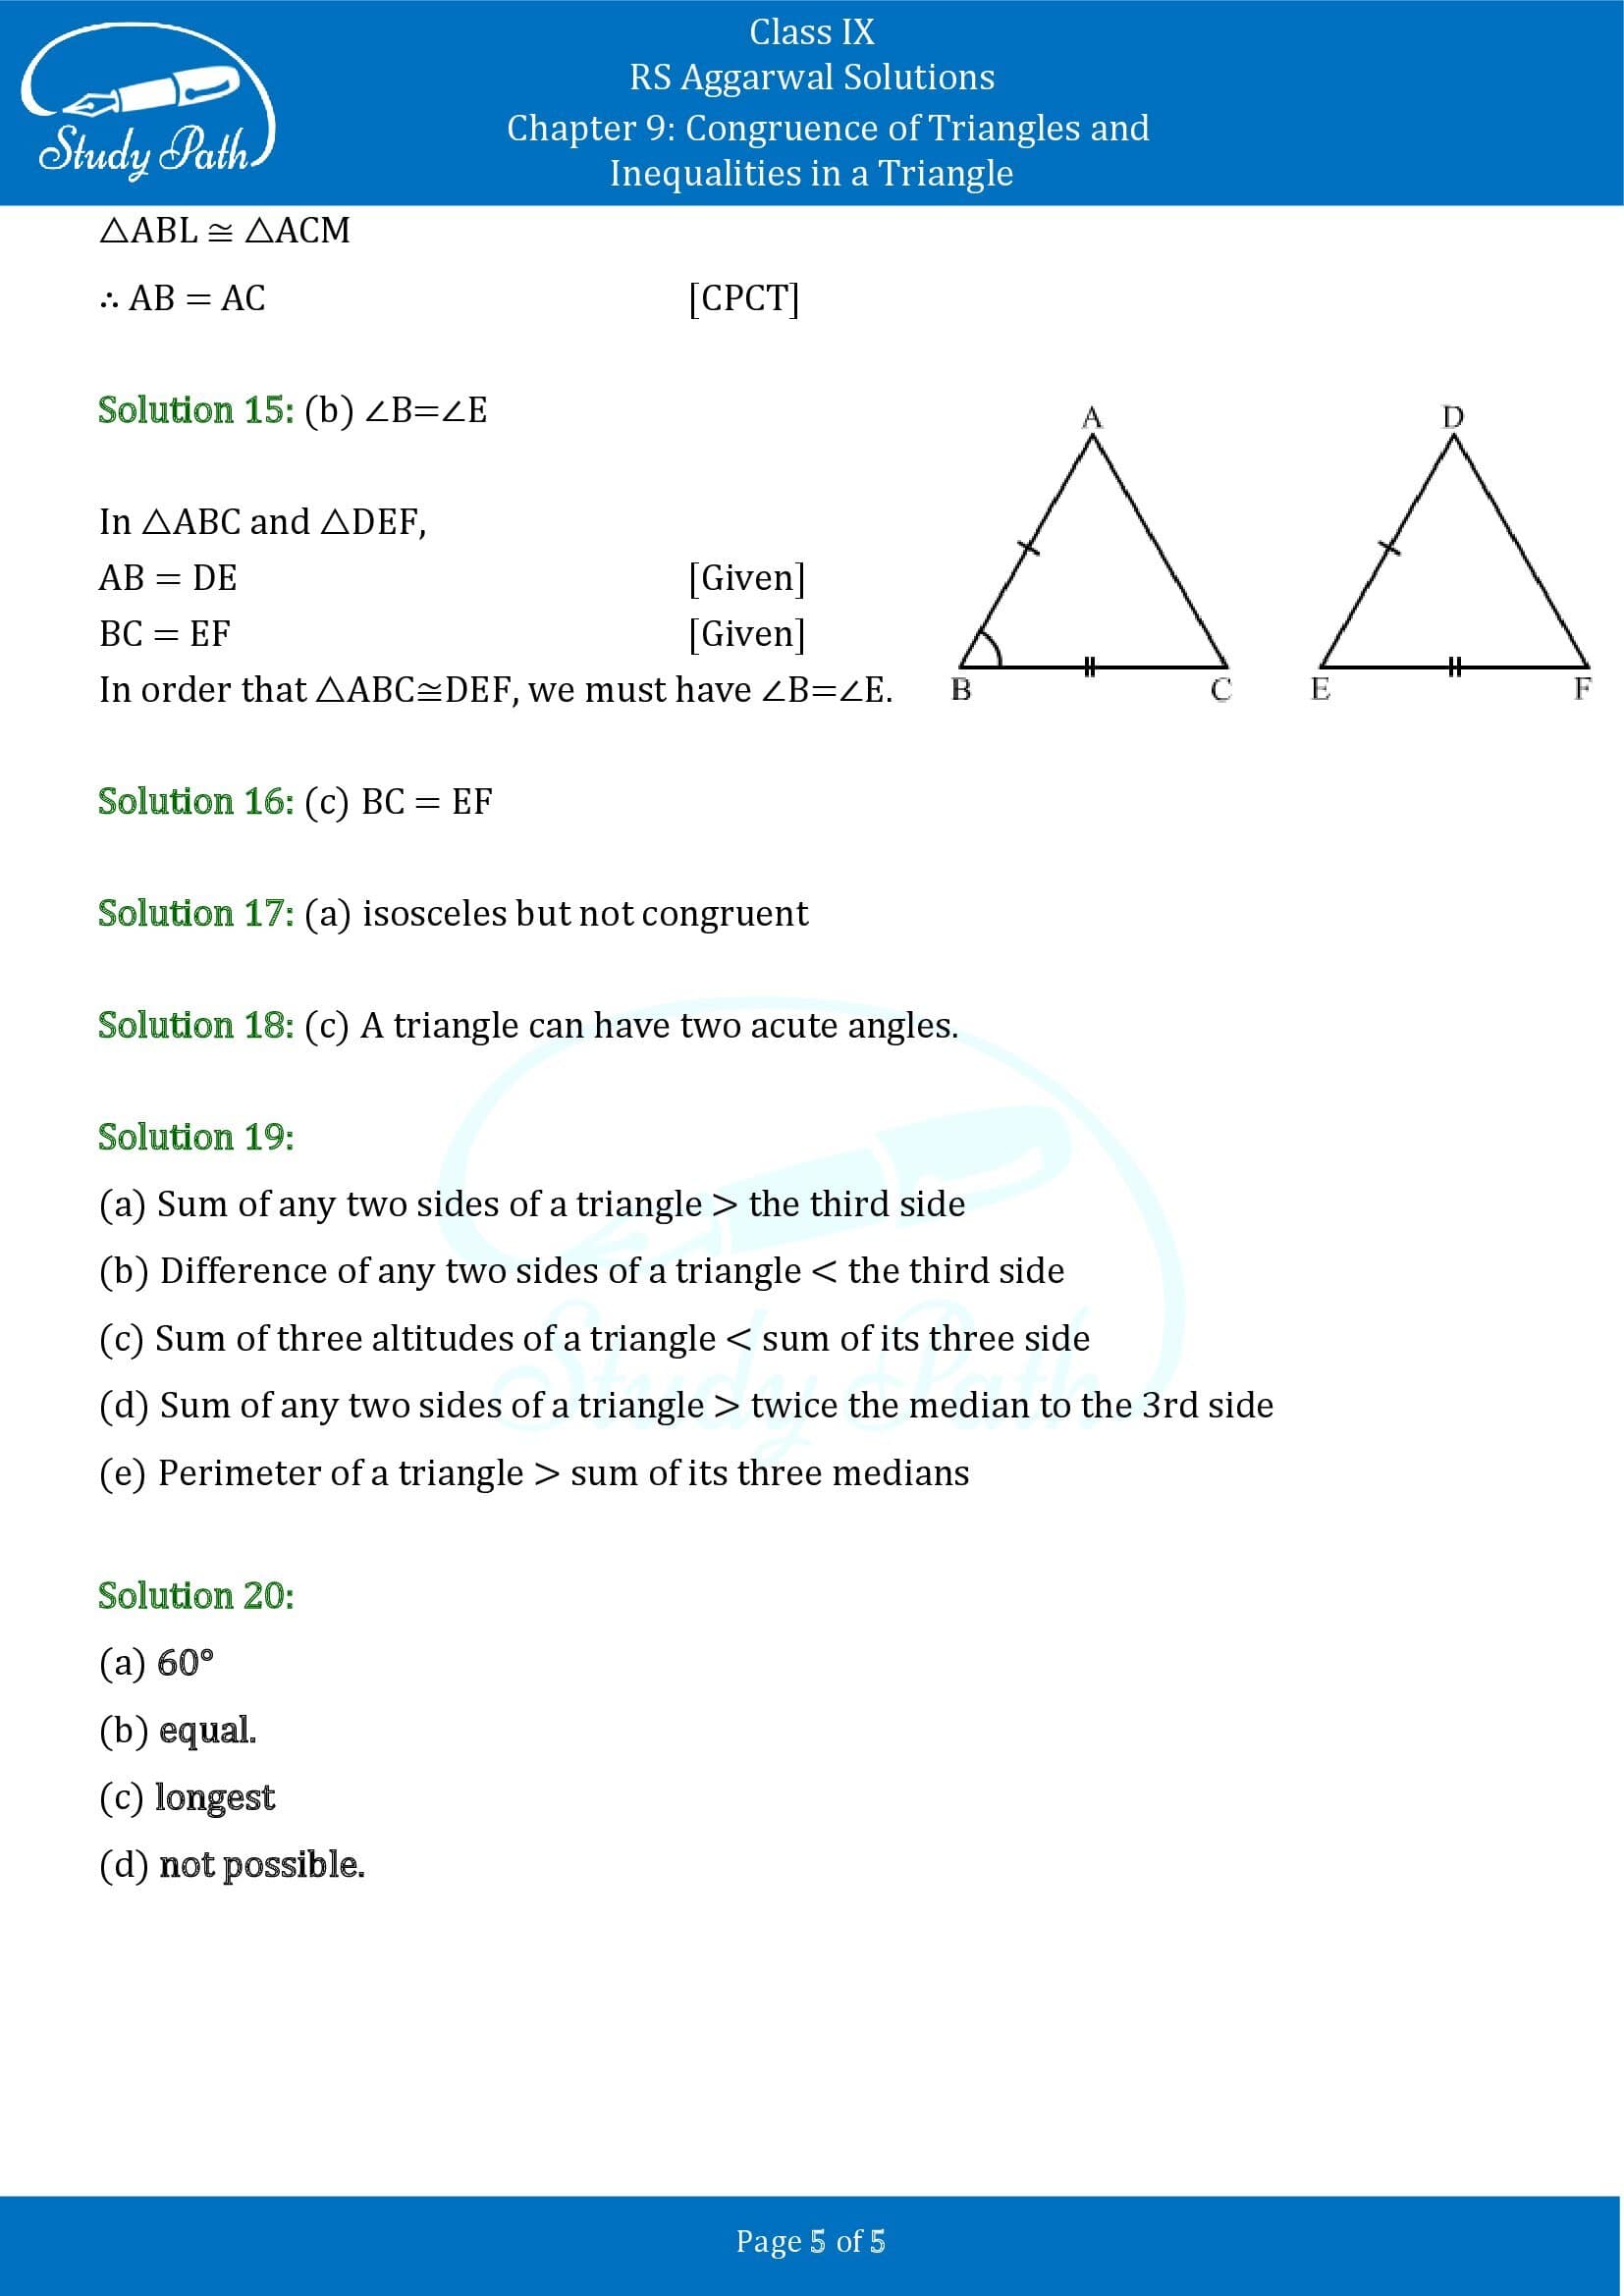 RS Aggarwal Solutions Class 9 Chapter 9 Congruence of Triangles and Inequalities in a Triangle Multiple Choice Questions MCQs 00005